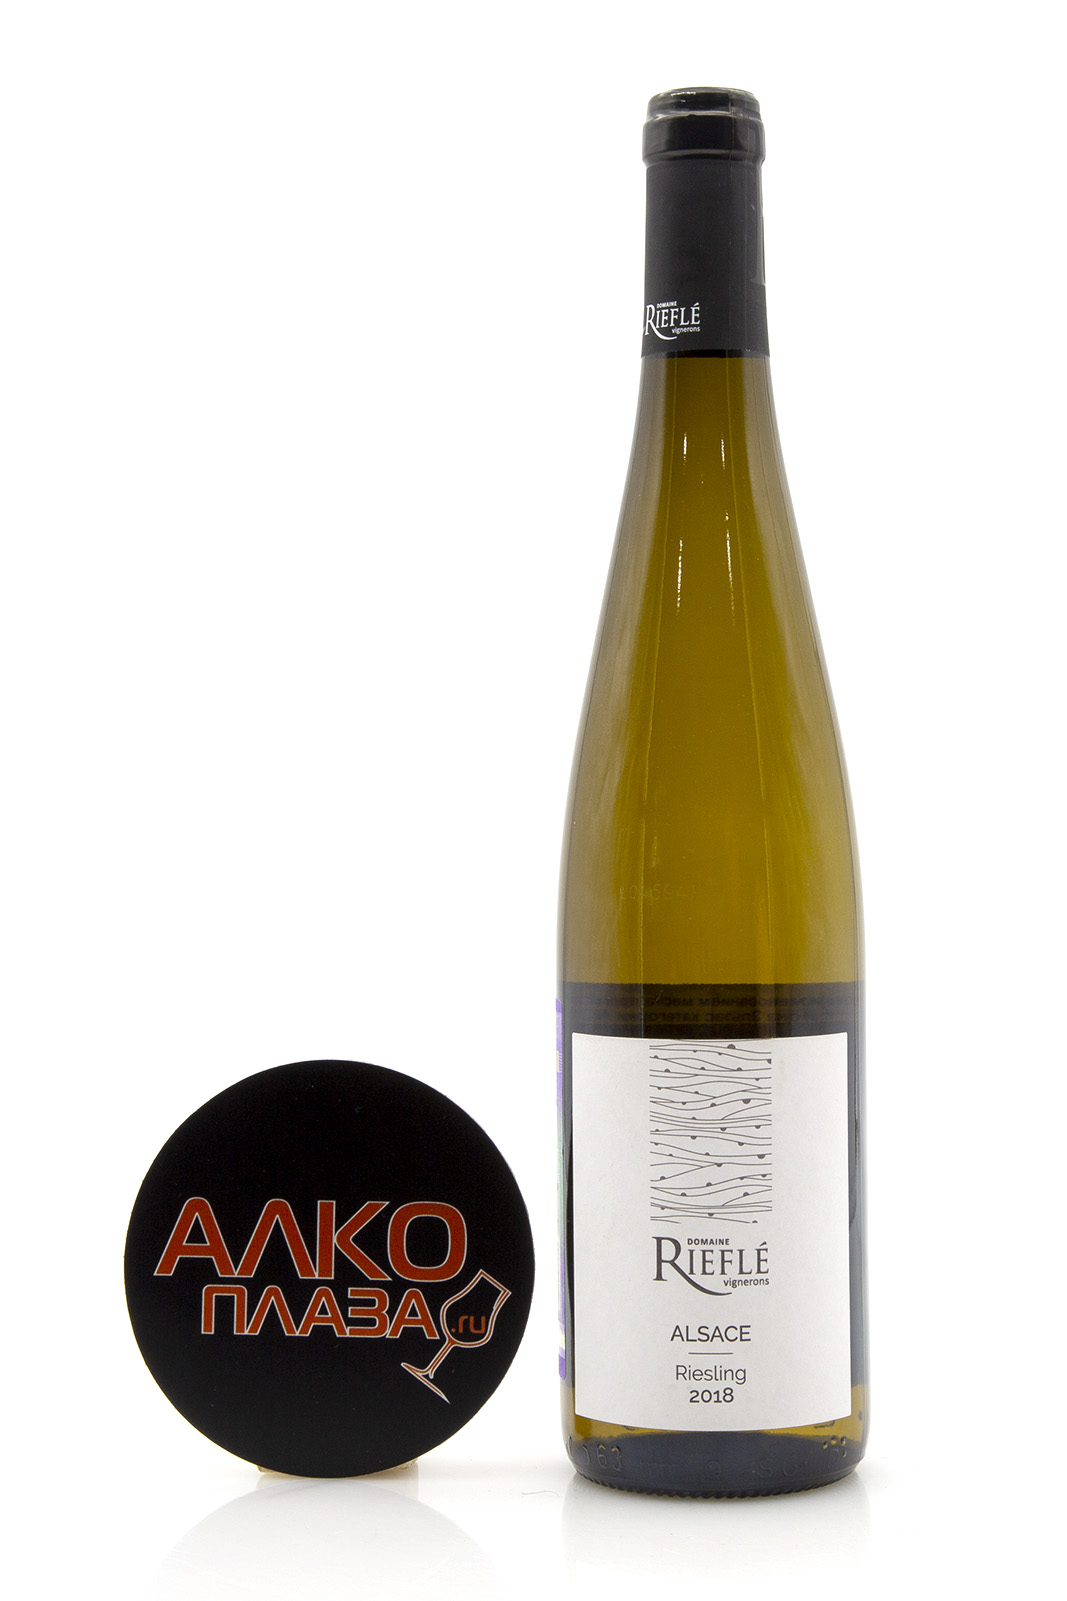 Domaine Riefle Riesling Alsace AOC 0.75l Французское вино Домен Рифле Рислинг 0.75 л.